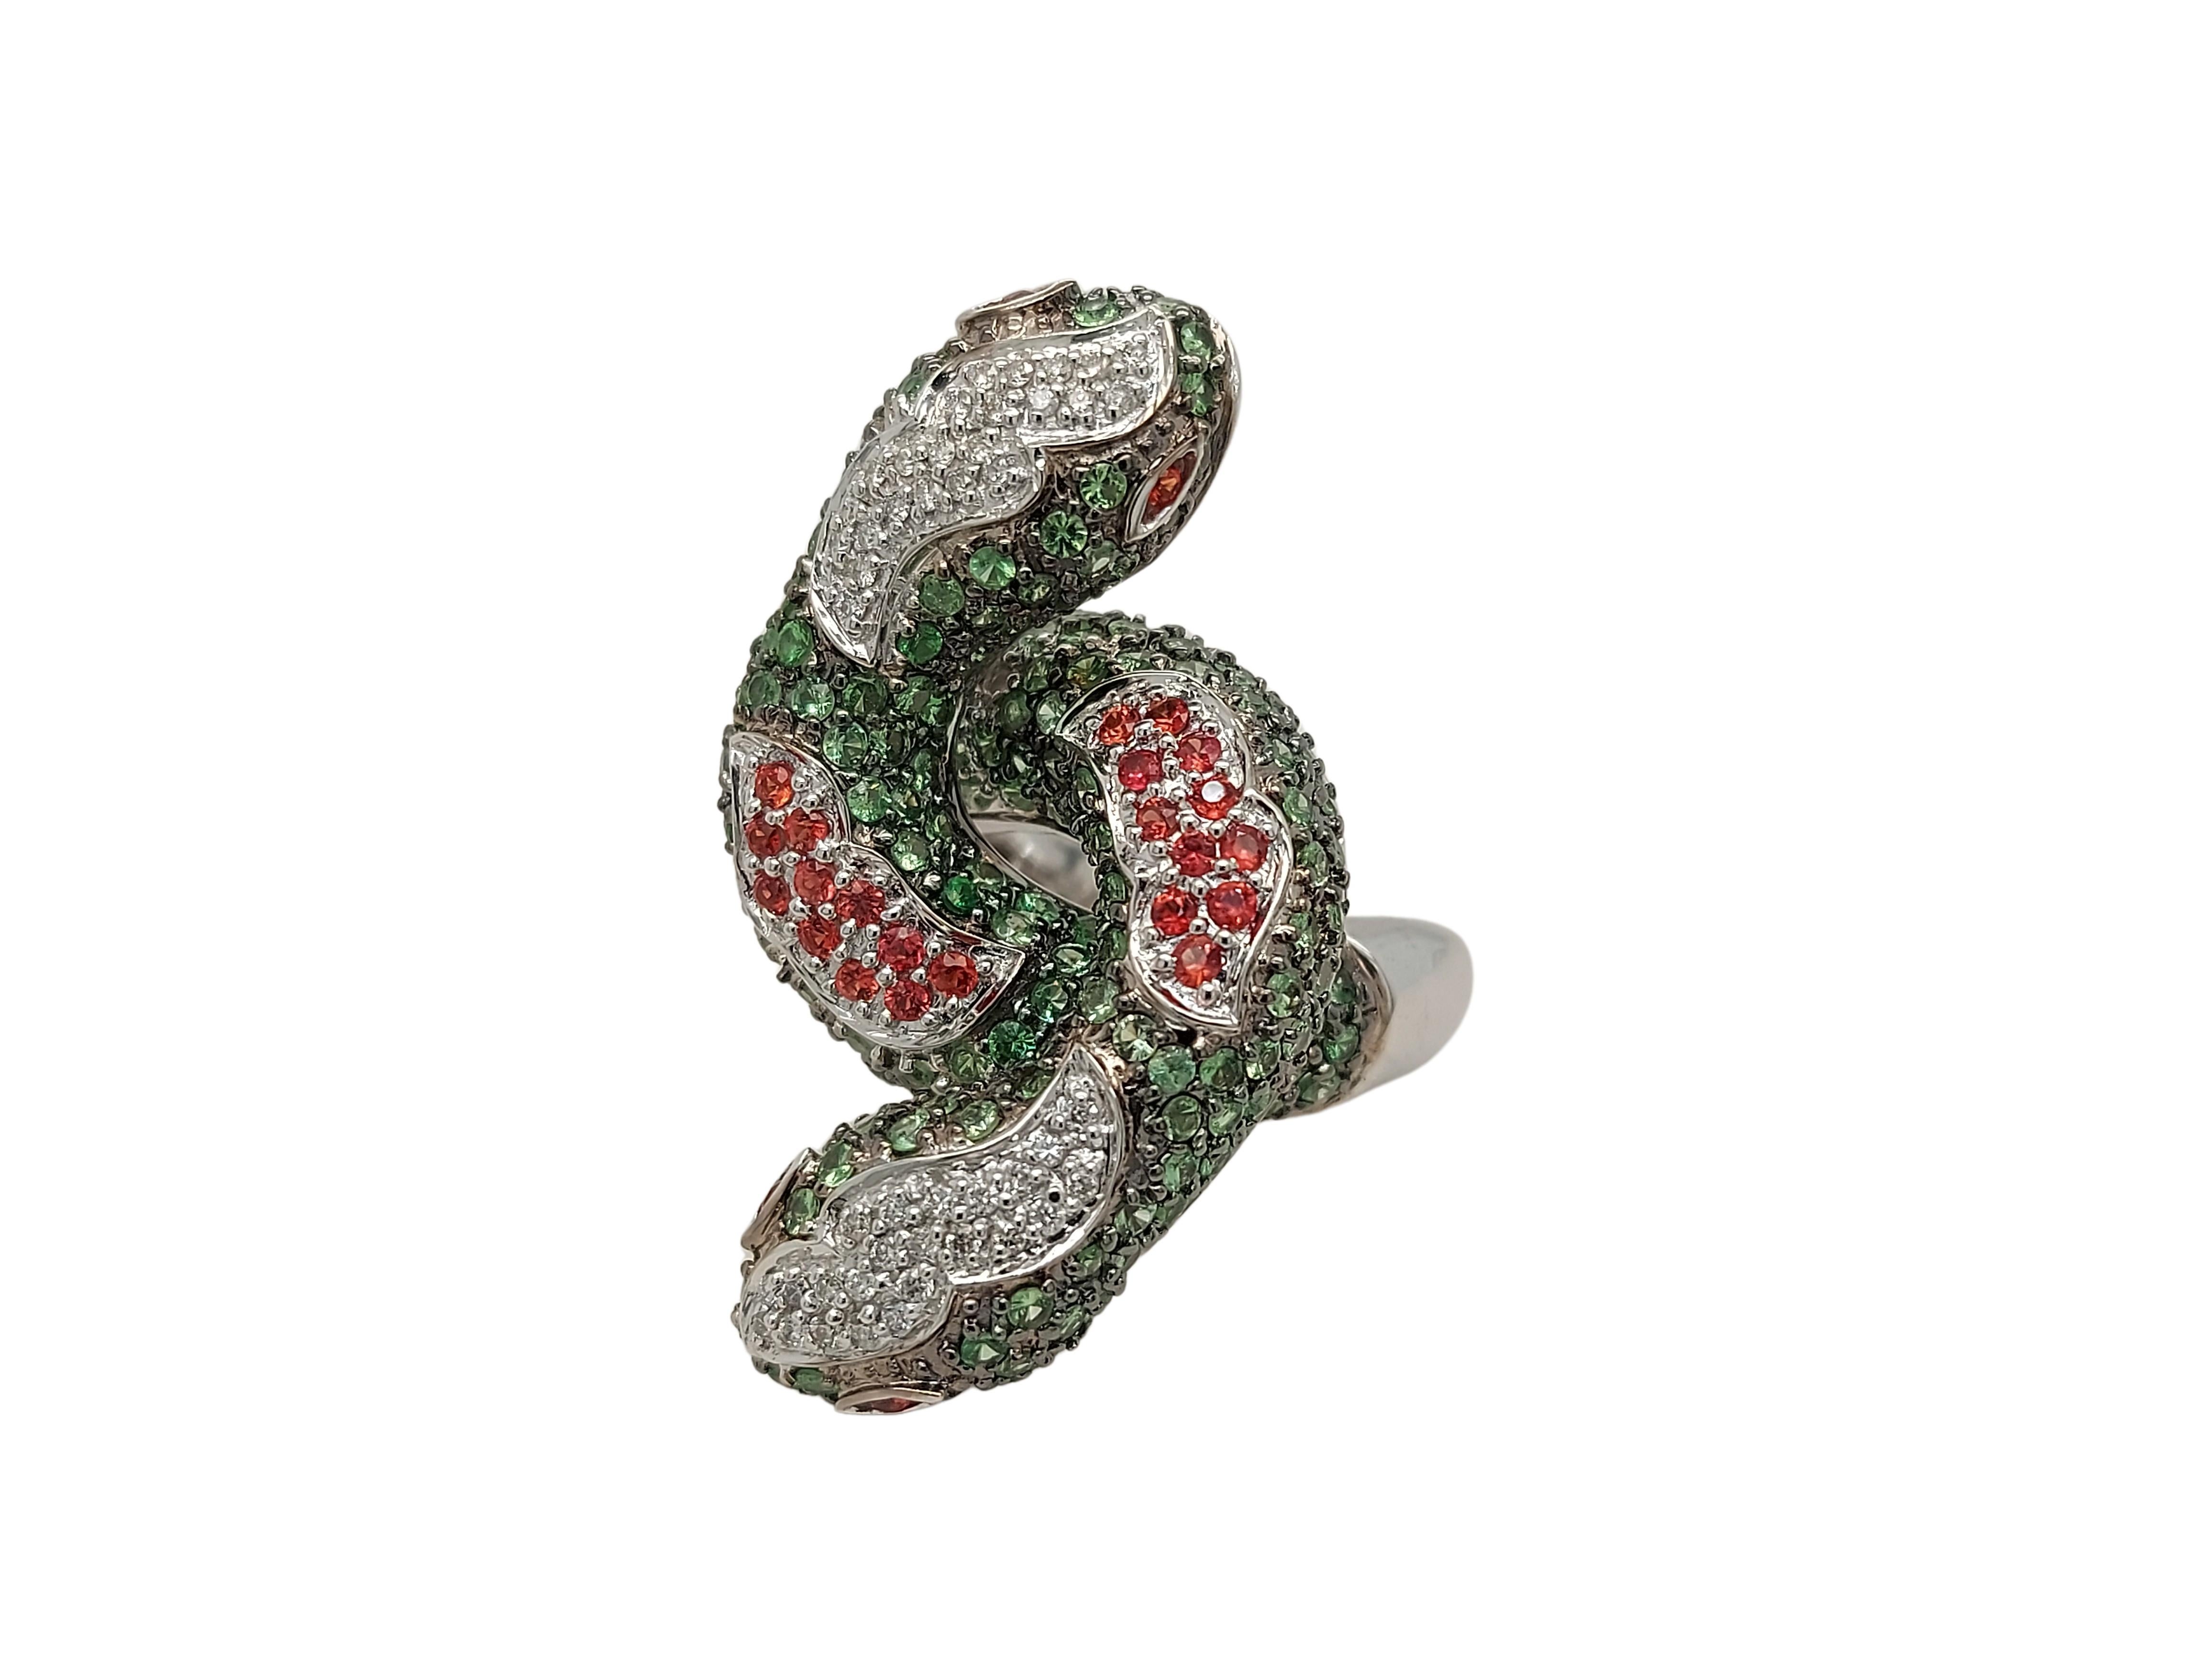 Gorgeous 18kt White Gold Double Snake ring Set with diamonds &  Precious Stones

Precious stones:
Diamonds: 50 diamonds 
Green : 200
Topaz: 26

Material: 18kt White Gold

Total weight: 21.6 gram / 0.760 oz / 13.9 dwt

Ring size: 57 EU / 8 US (can be